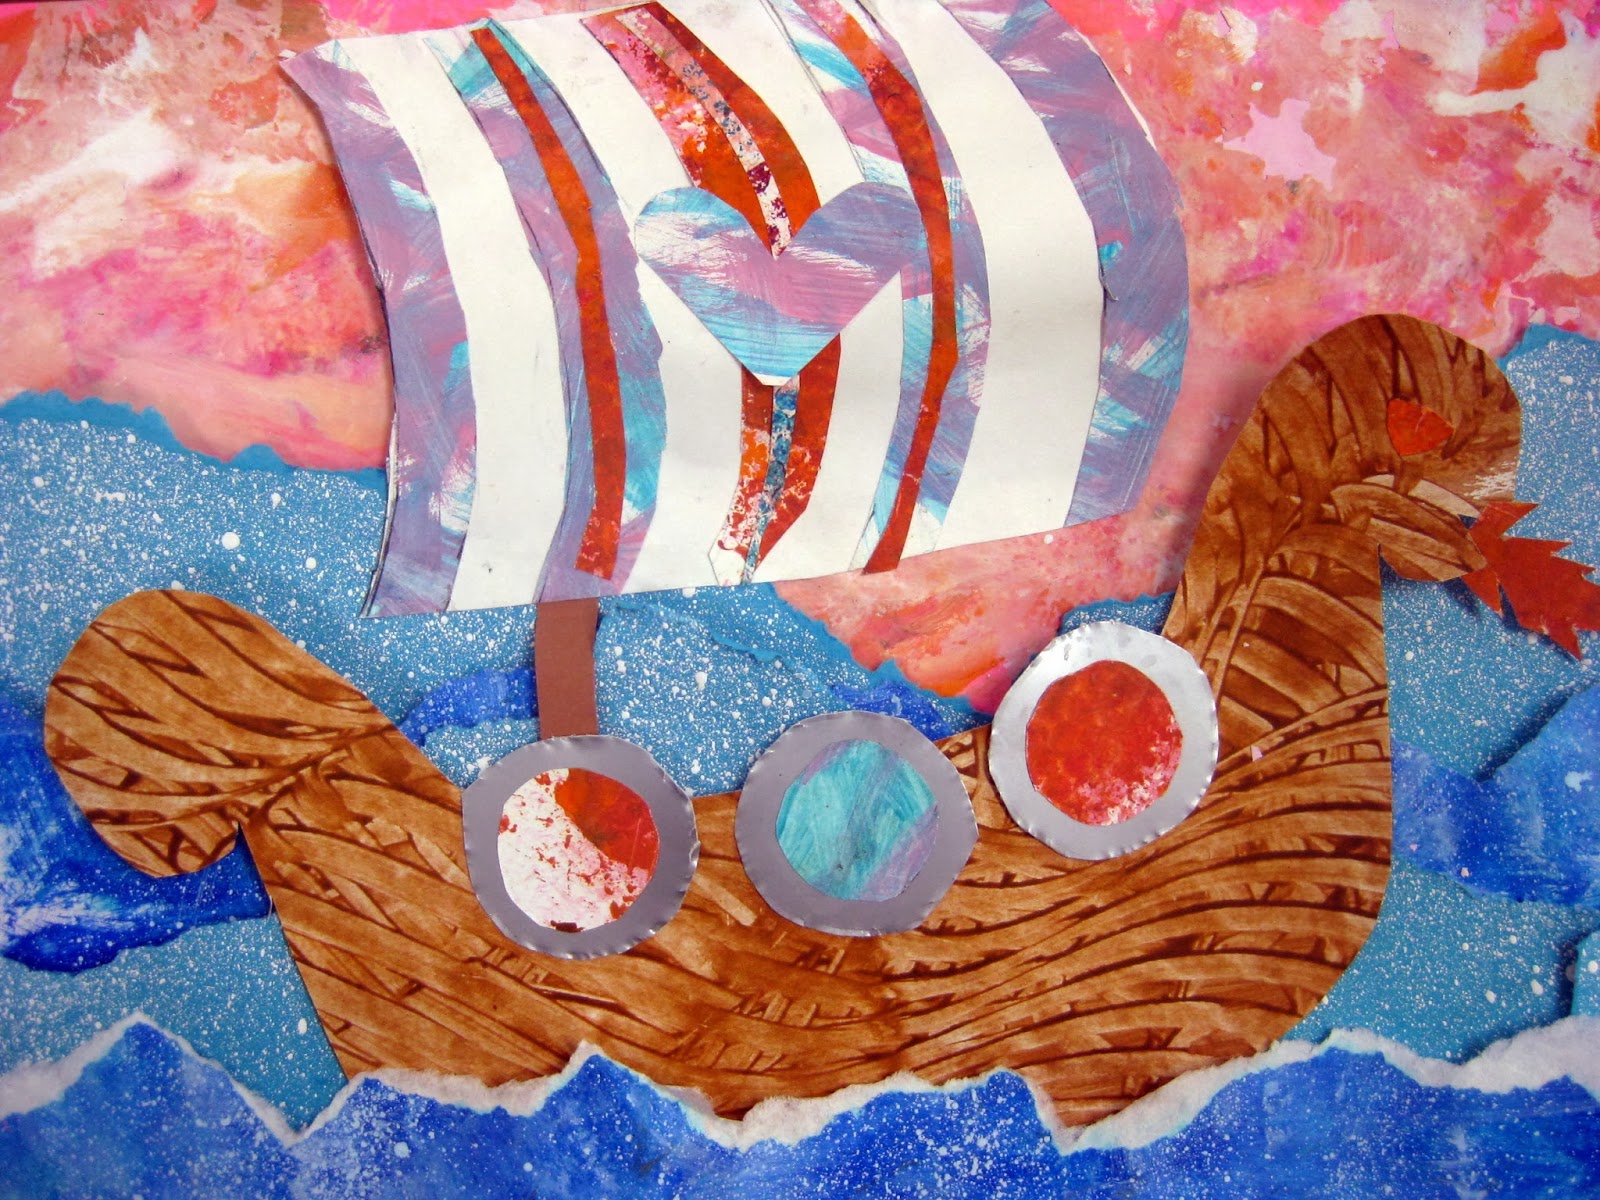 cassie stephens: in the art room: viking ship collages